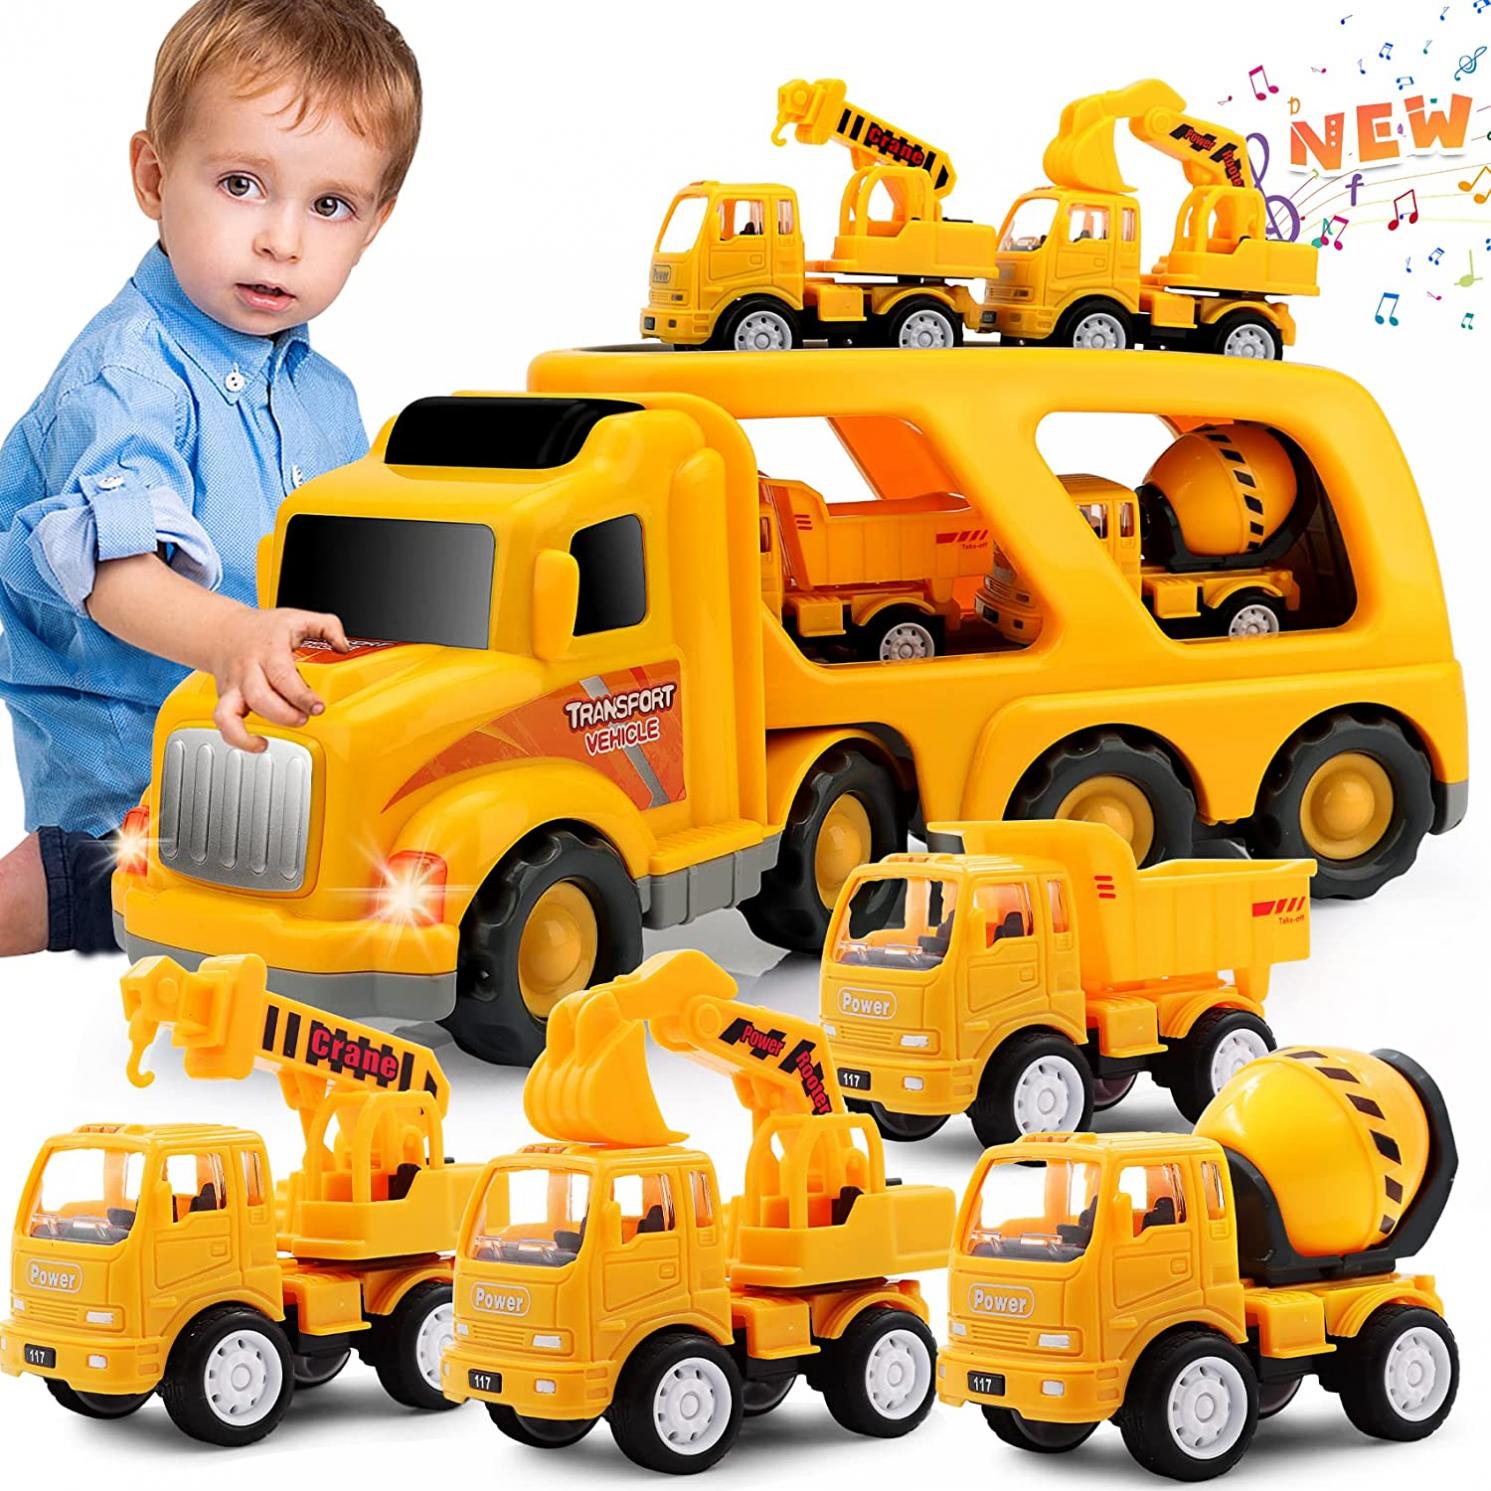 Nicmore Kids Toys Car for Boys: Boy Toy Trucks for 1 2 3 4 5 6 Year Old Boys Girls | Toddler Toys 5 in 1 Carrier Vehicle Construction Toys for Kids Age 1-2 2-4 3-5 | Birthday Party Boy Gifts for Kids